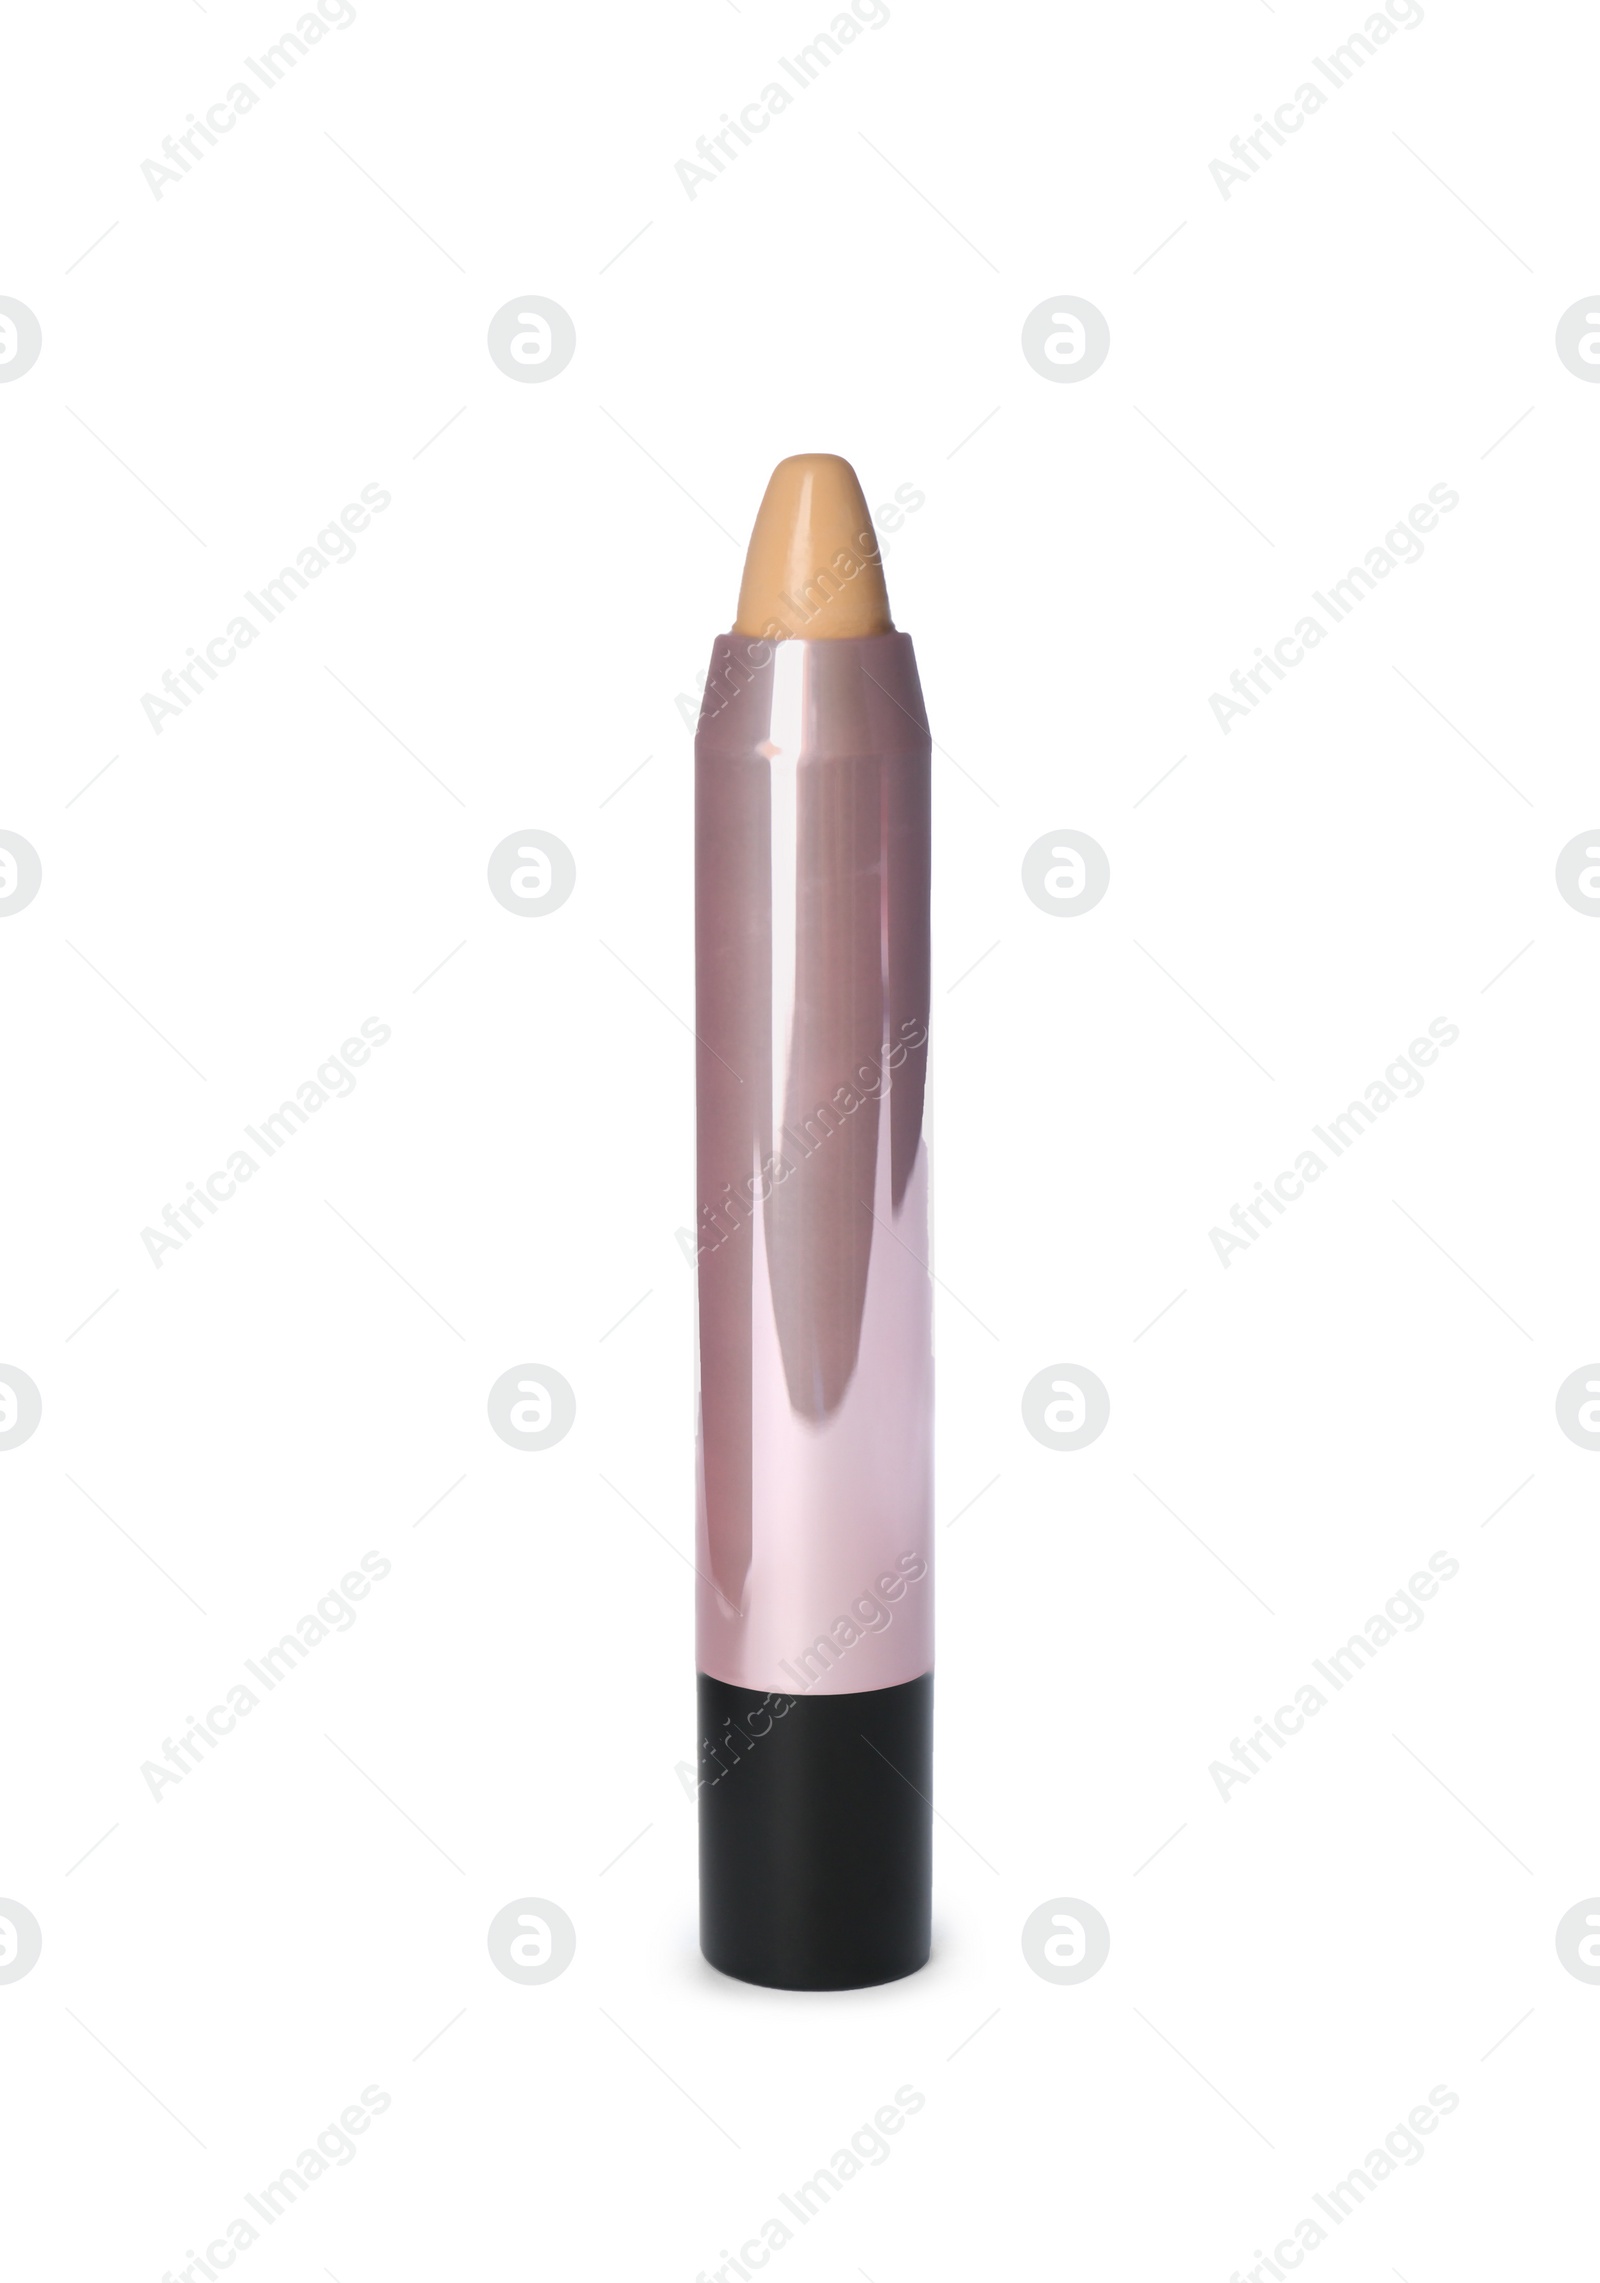 Photo of Pencil concealer isolated on white. Makeup product